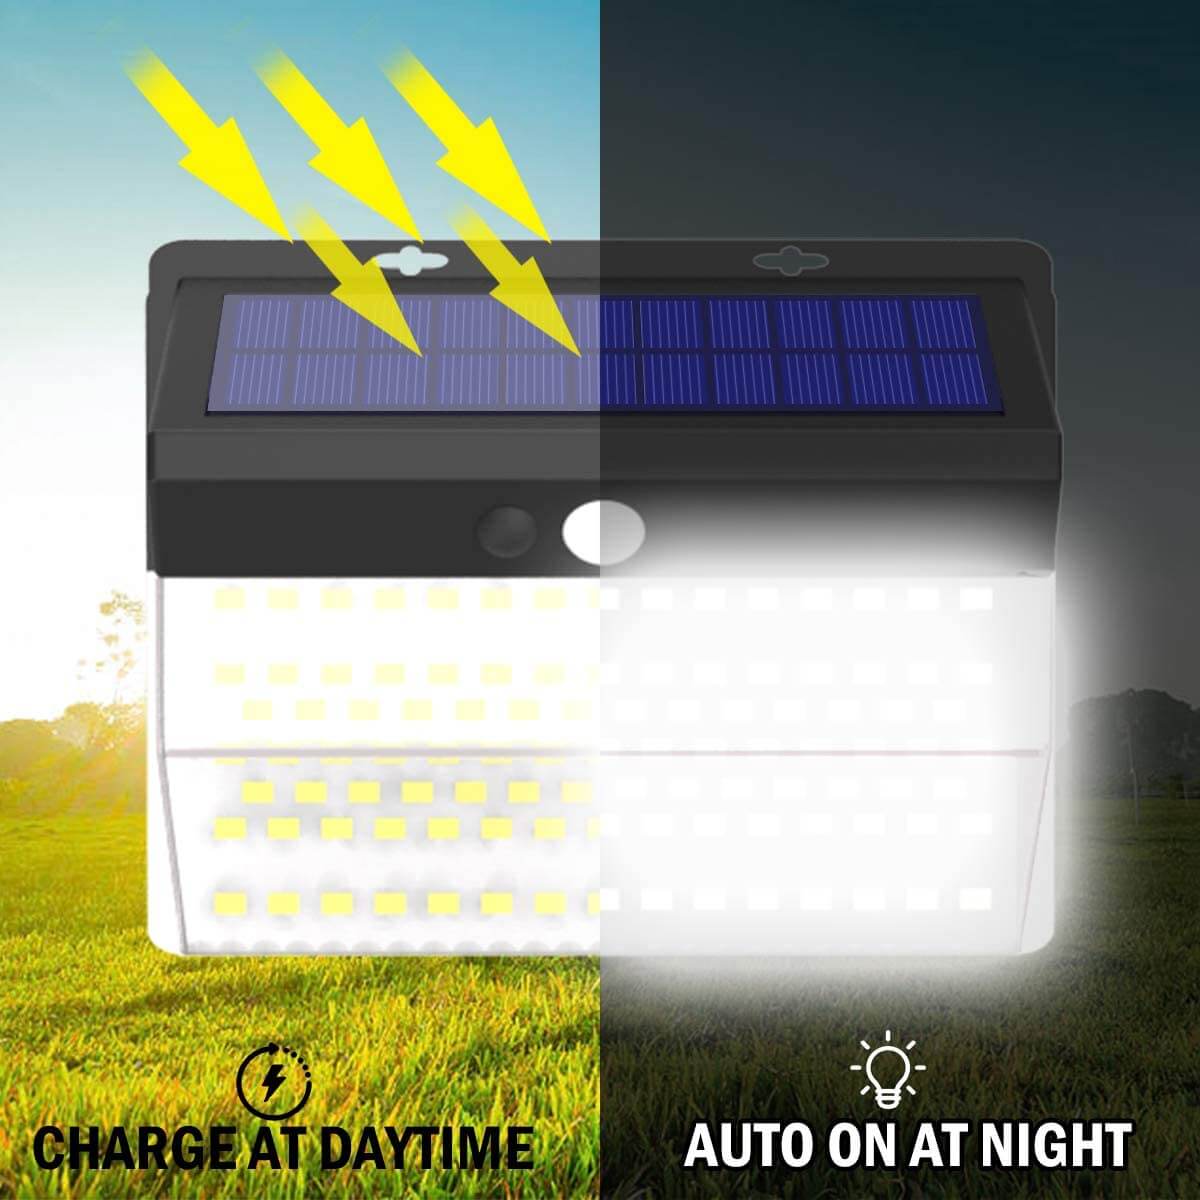 Charge at daytime, auto on at night